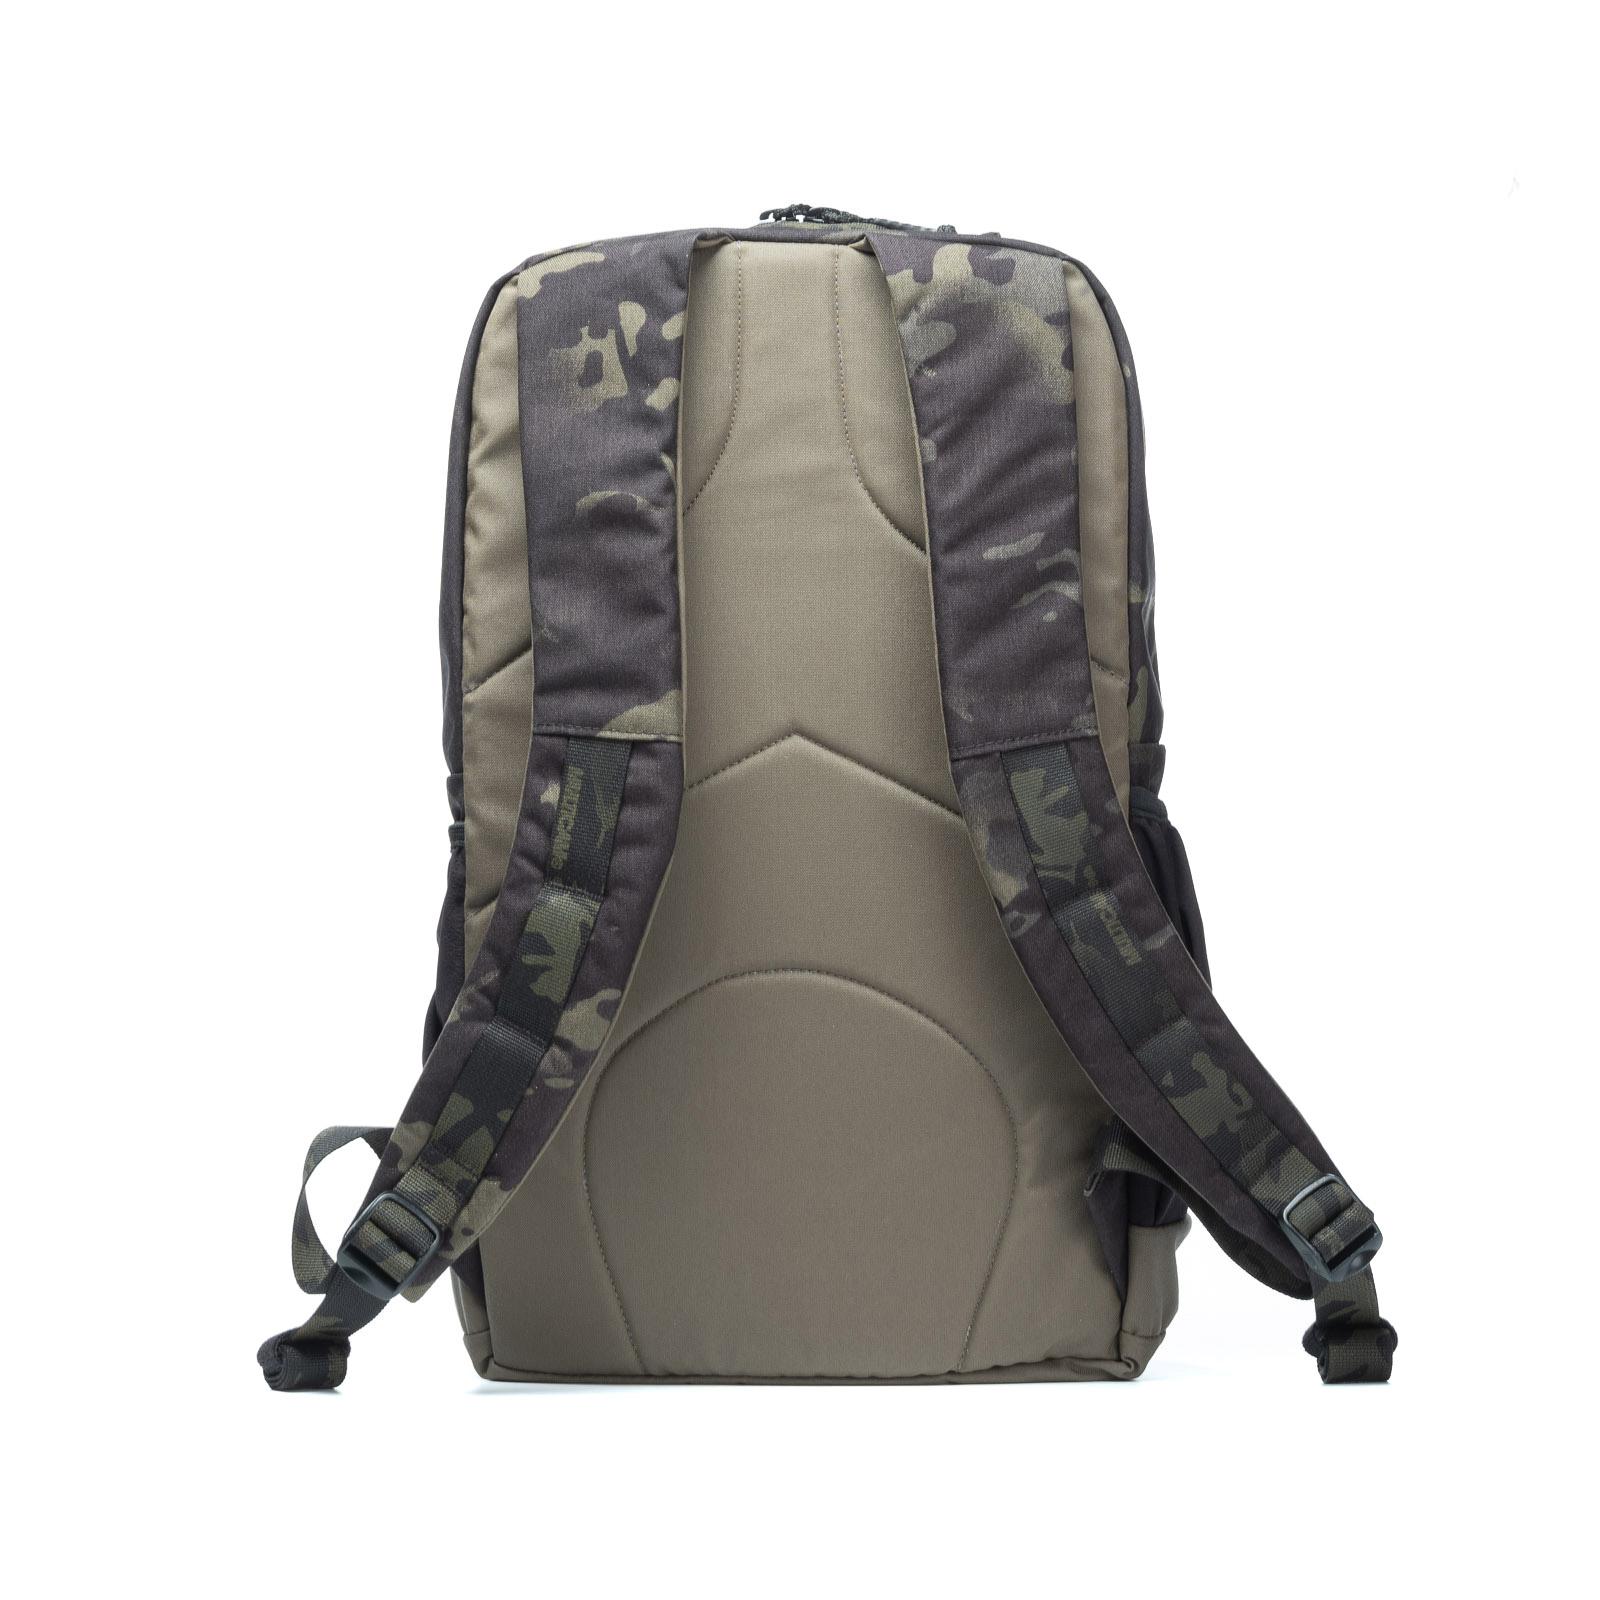 Eagle All Purpose Pack